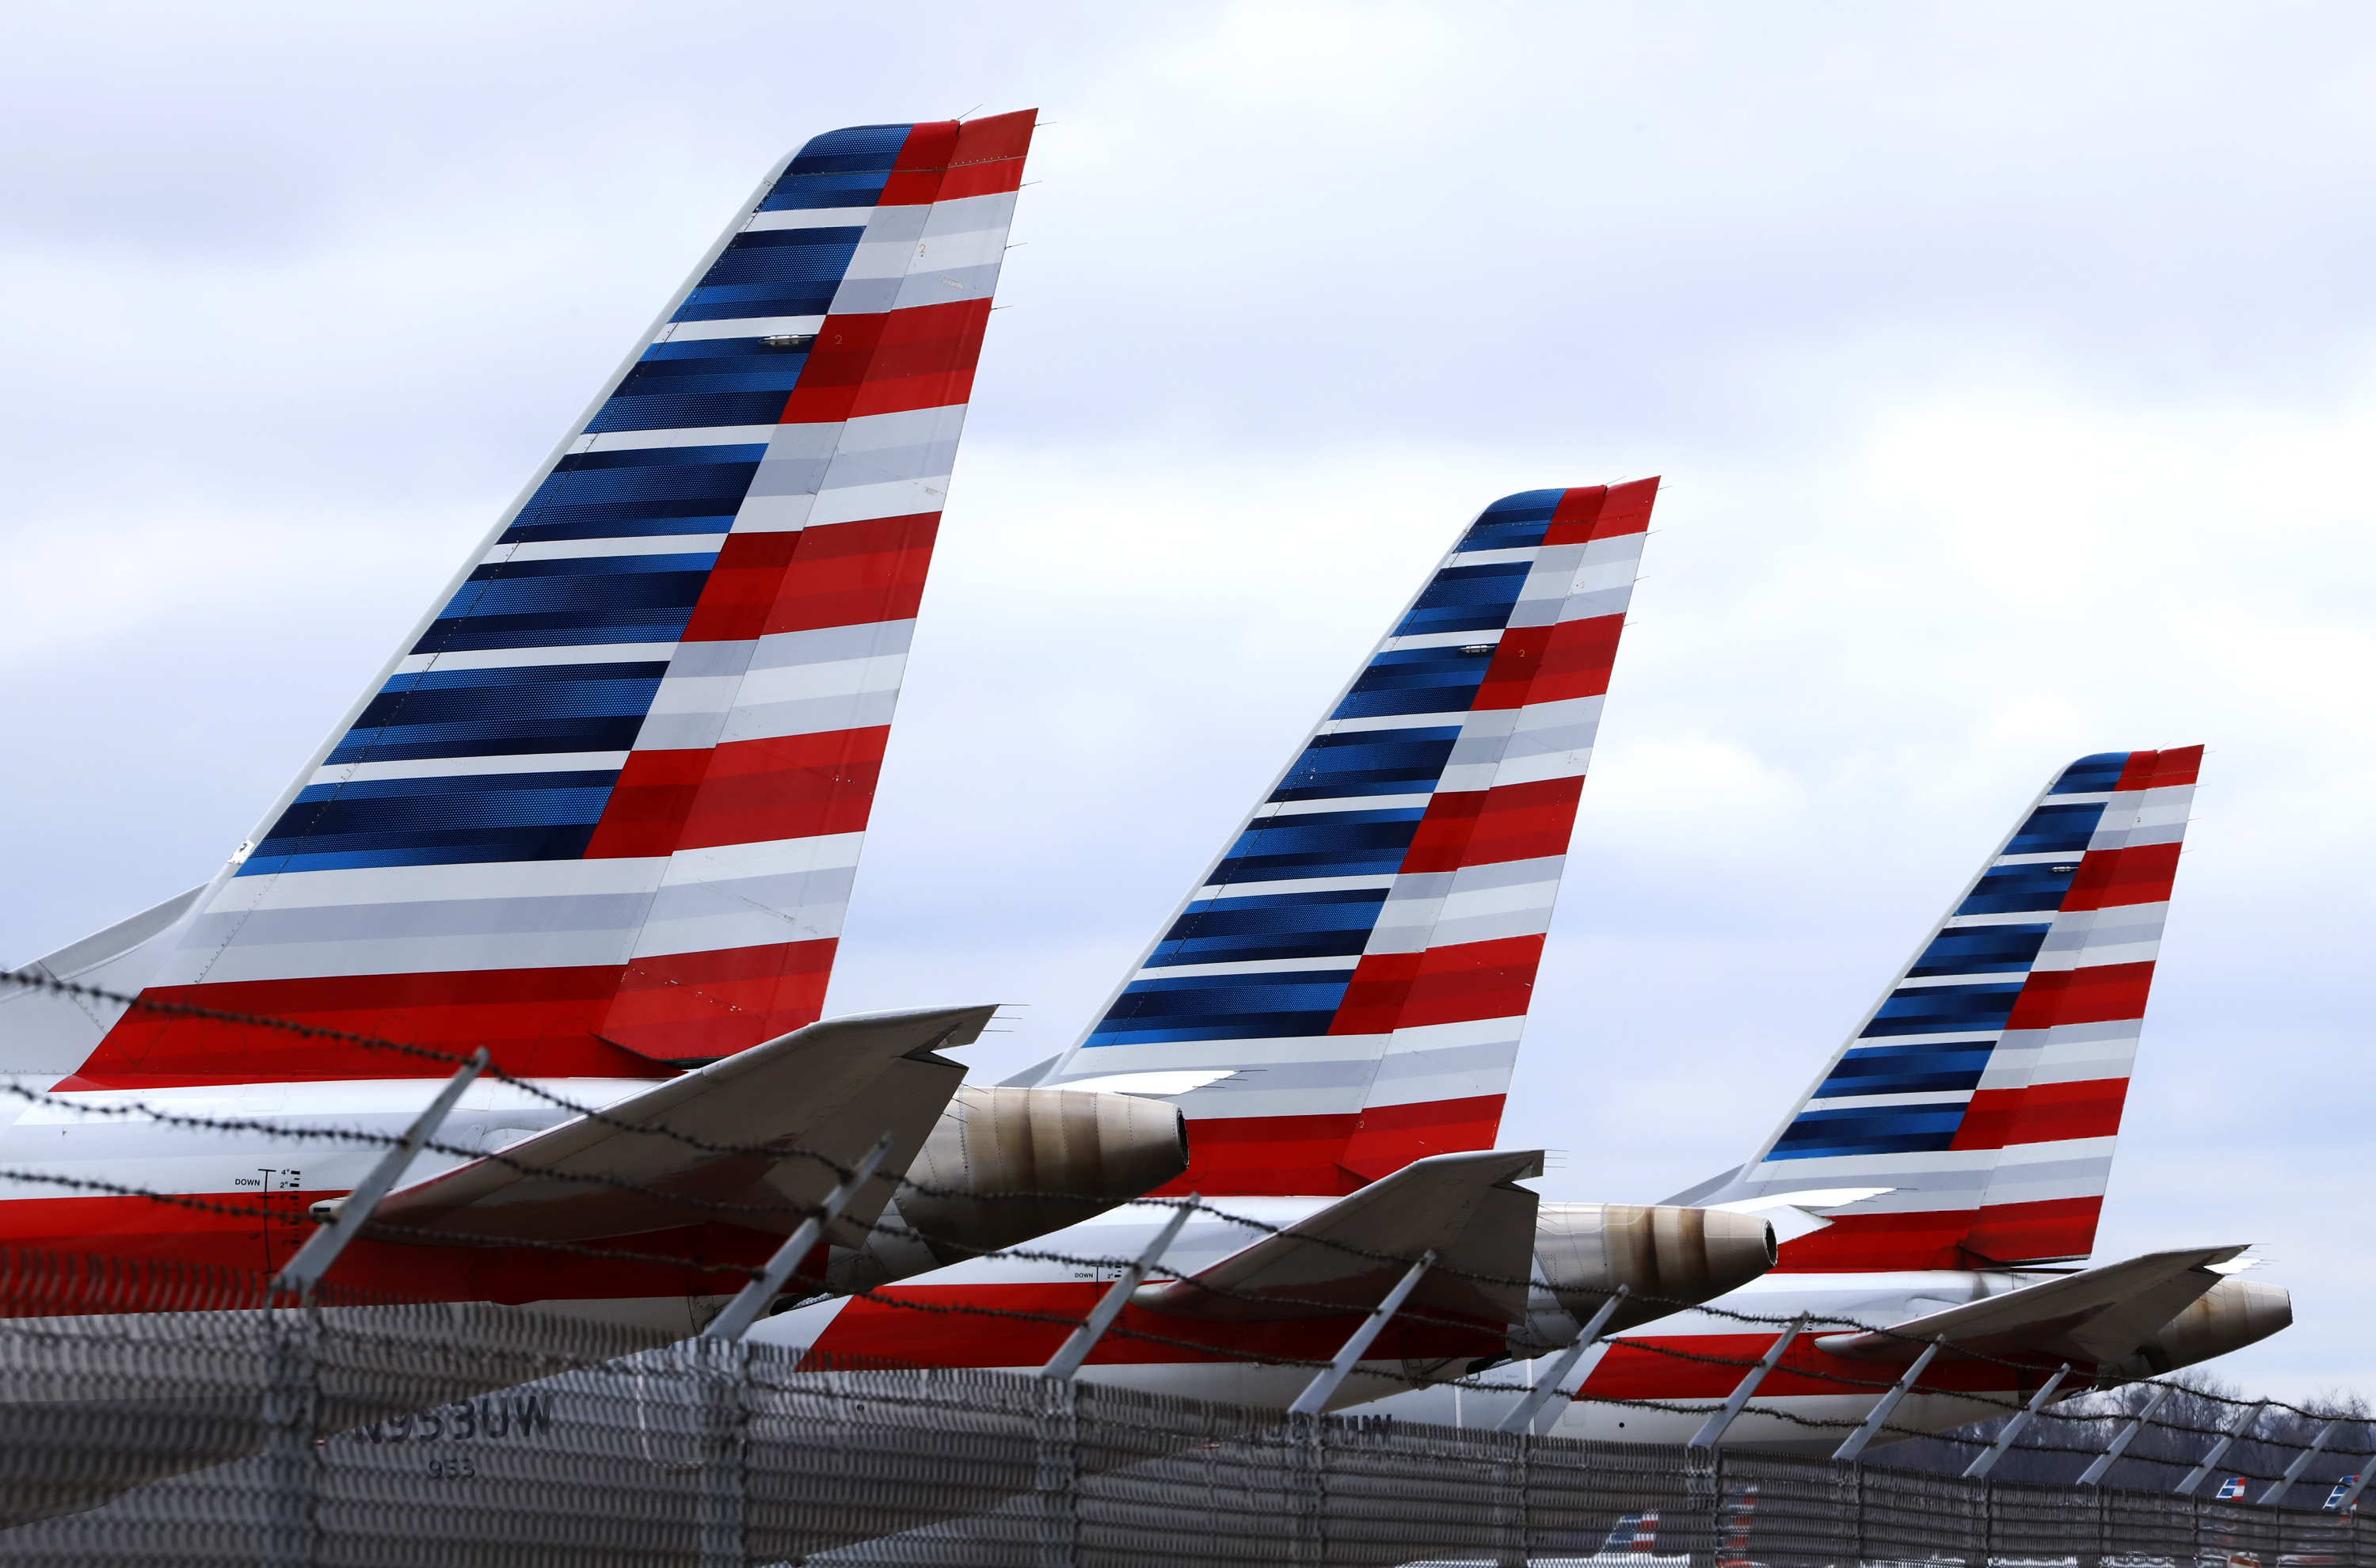 These are some of the 88 American Airlines planes stored at Pittsburgh International Airport in Imperial, Pa., on Tuesday, March 31, 2020. As airlines cut more service, due to the COVID-19 pandemic, Pittsburgh International Airport has closed one of its four runways to shelter in place 96 planes, mostly from American Airlines, as of Monday, March 30, 2020. The airport has the capacity to store 140 planes.(AP Photo/Gene J. Puskar)